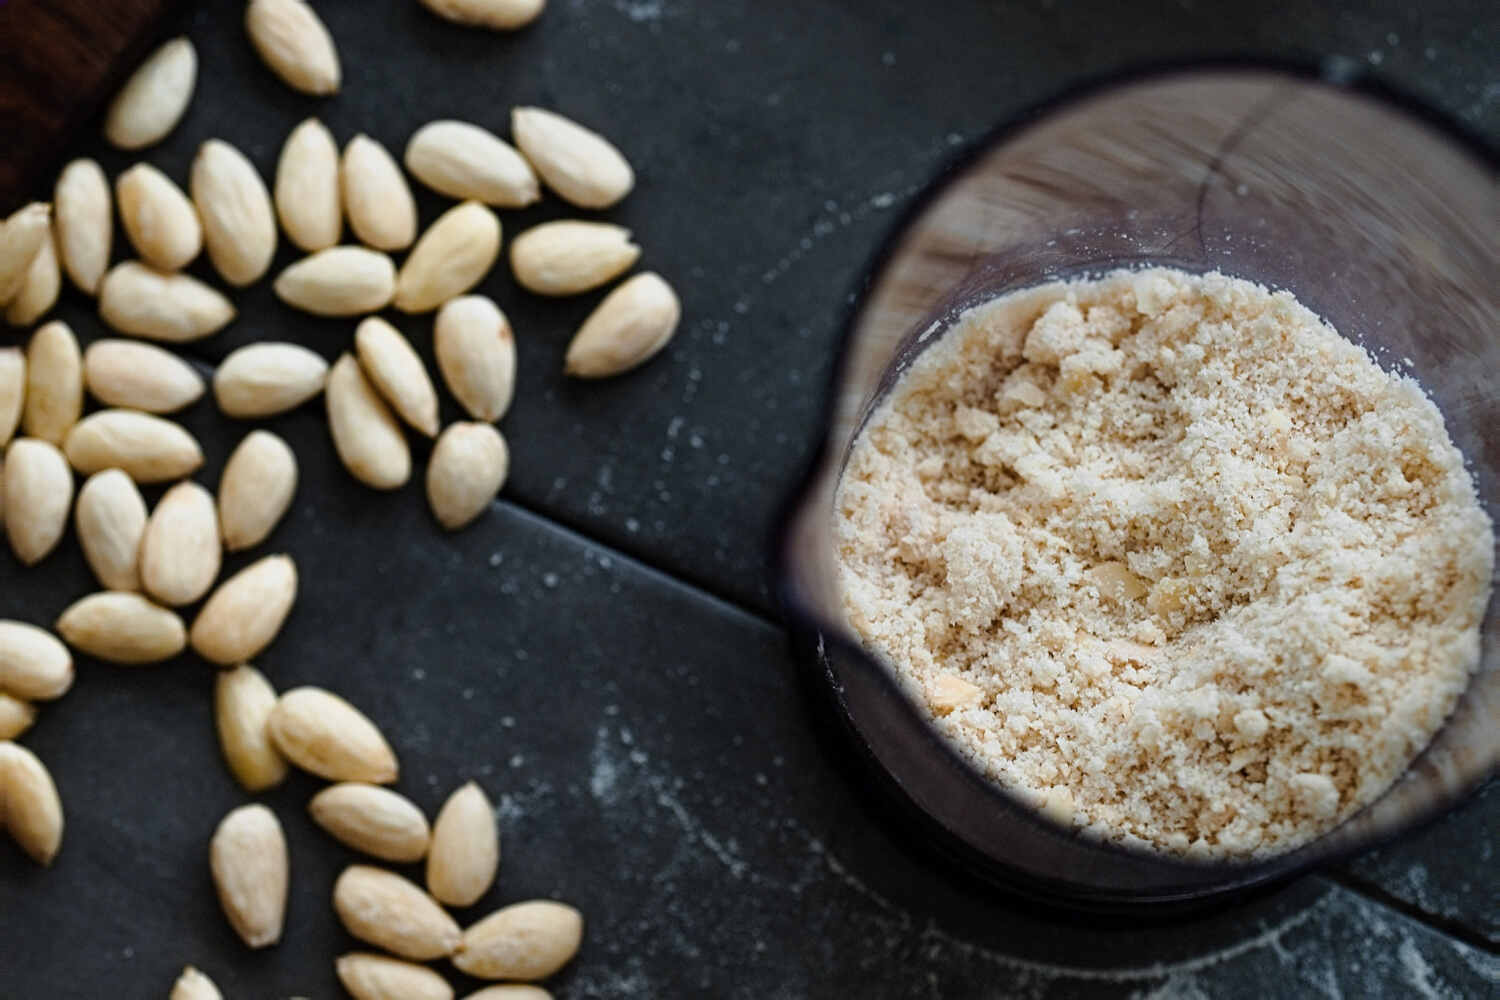 You can easily make almond powder at home